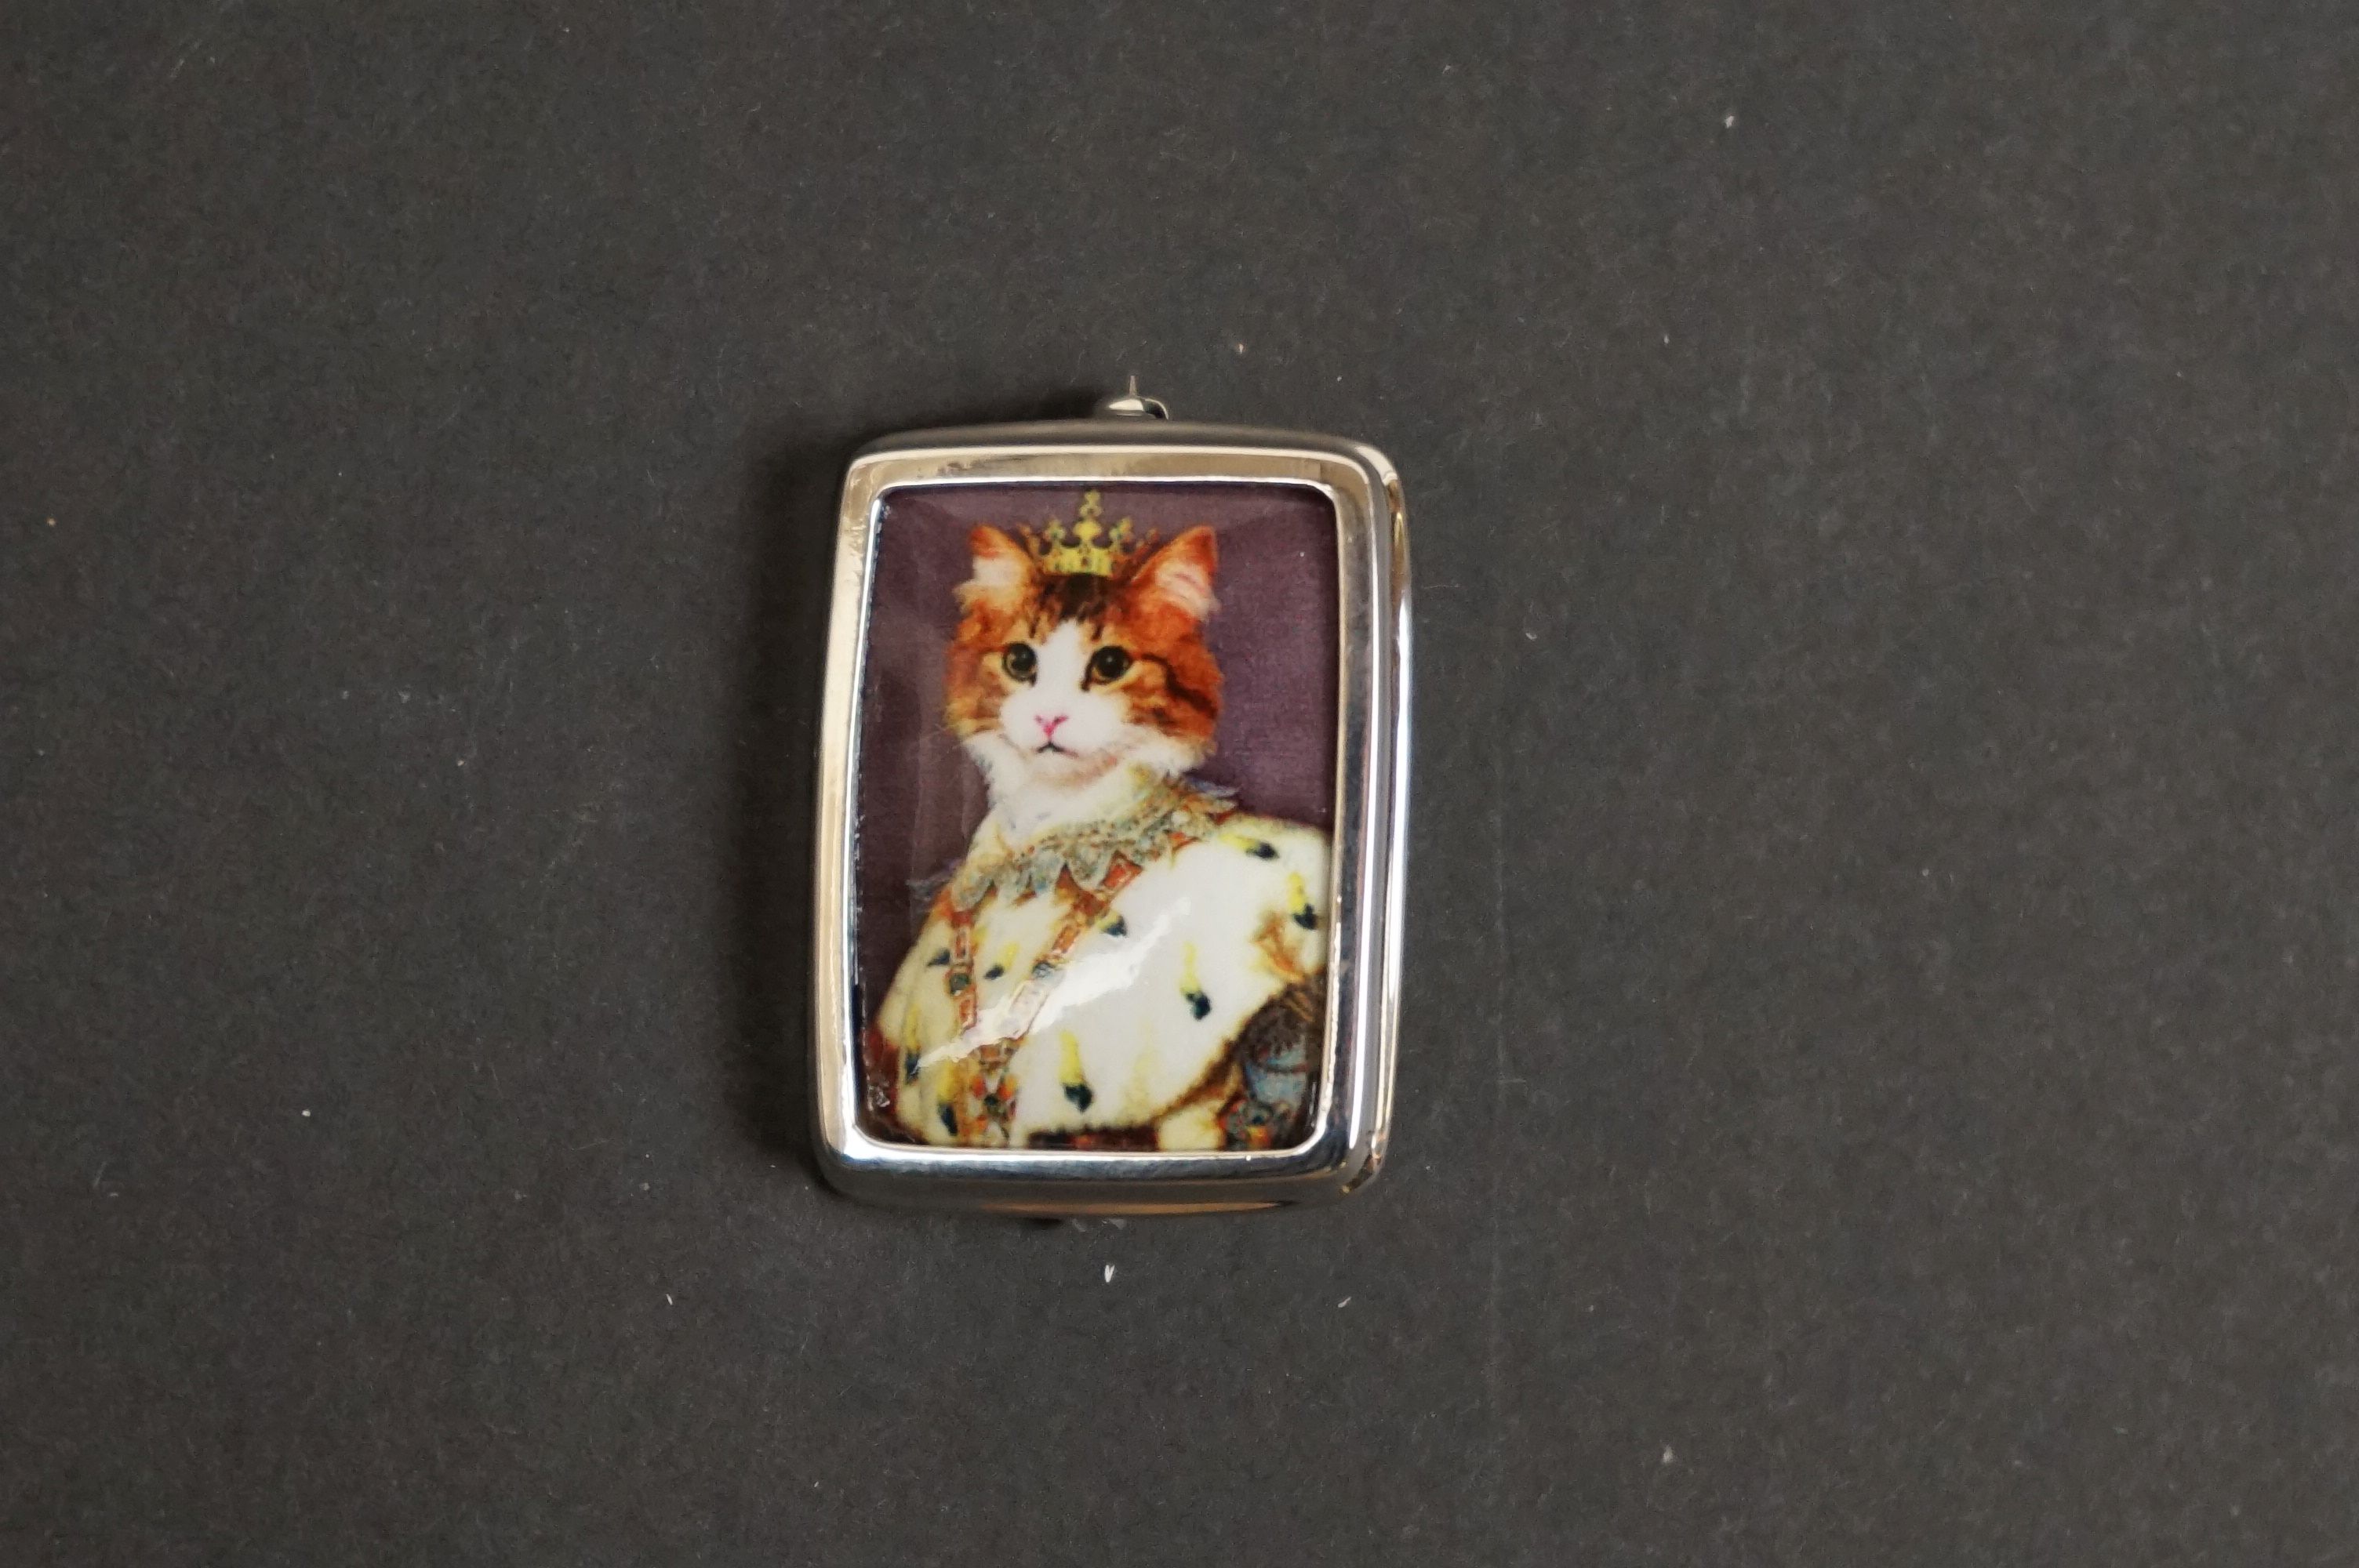 Silver and enamel brooch with pictorial image of a royal cat - Image 2 of 3